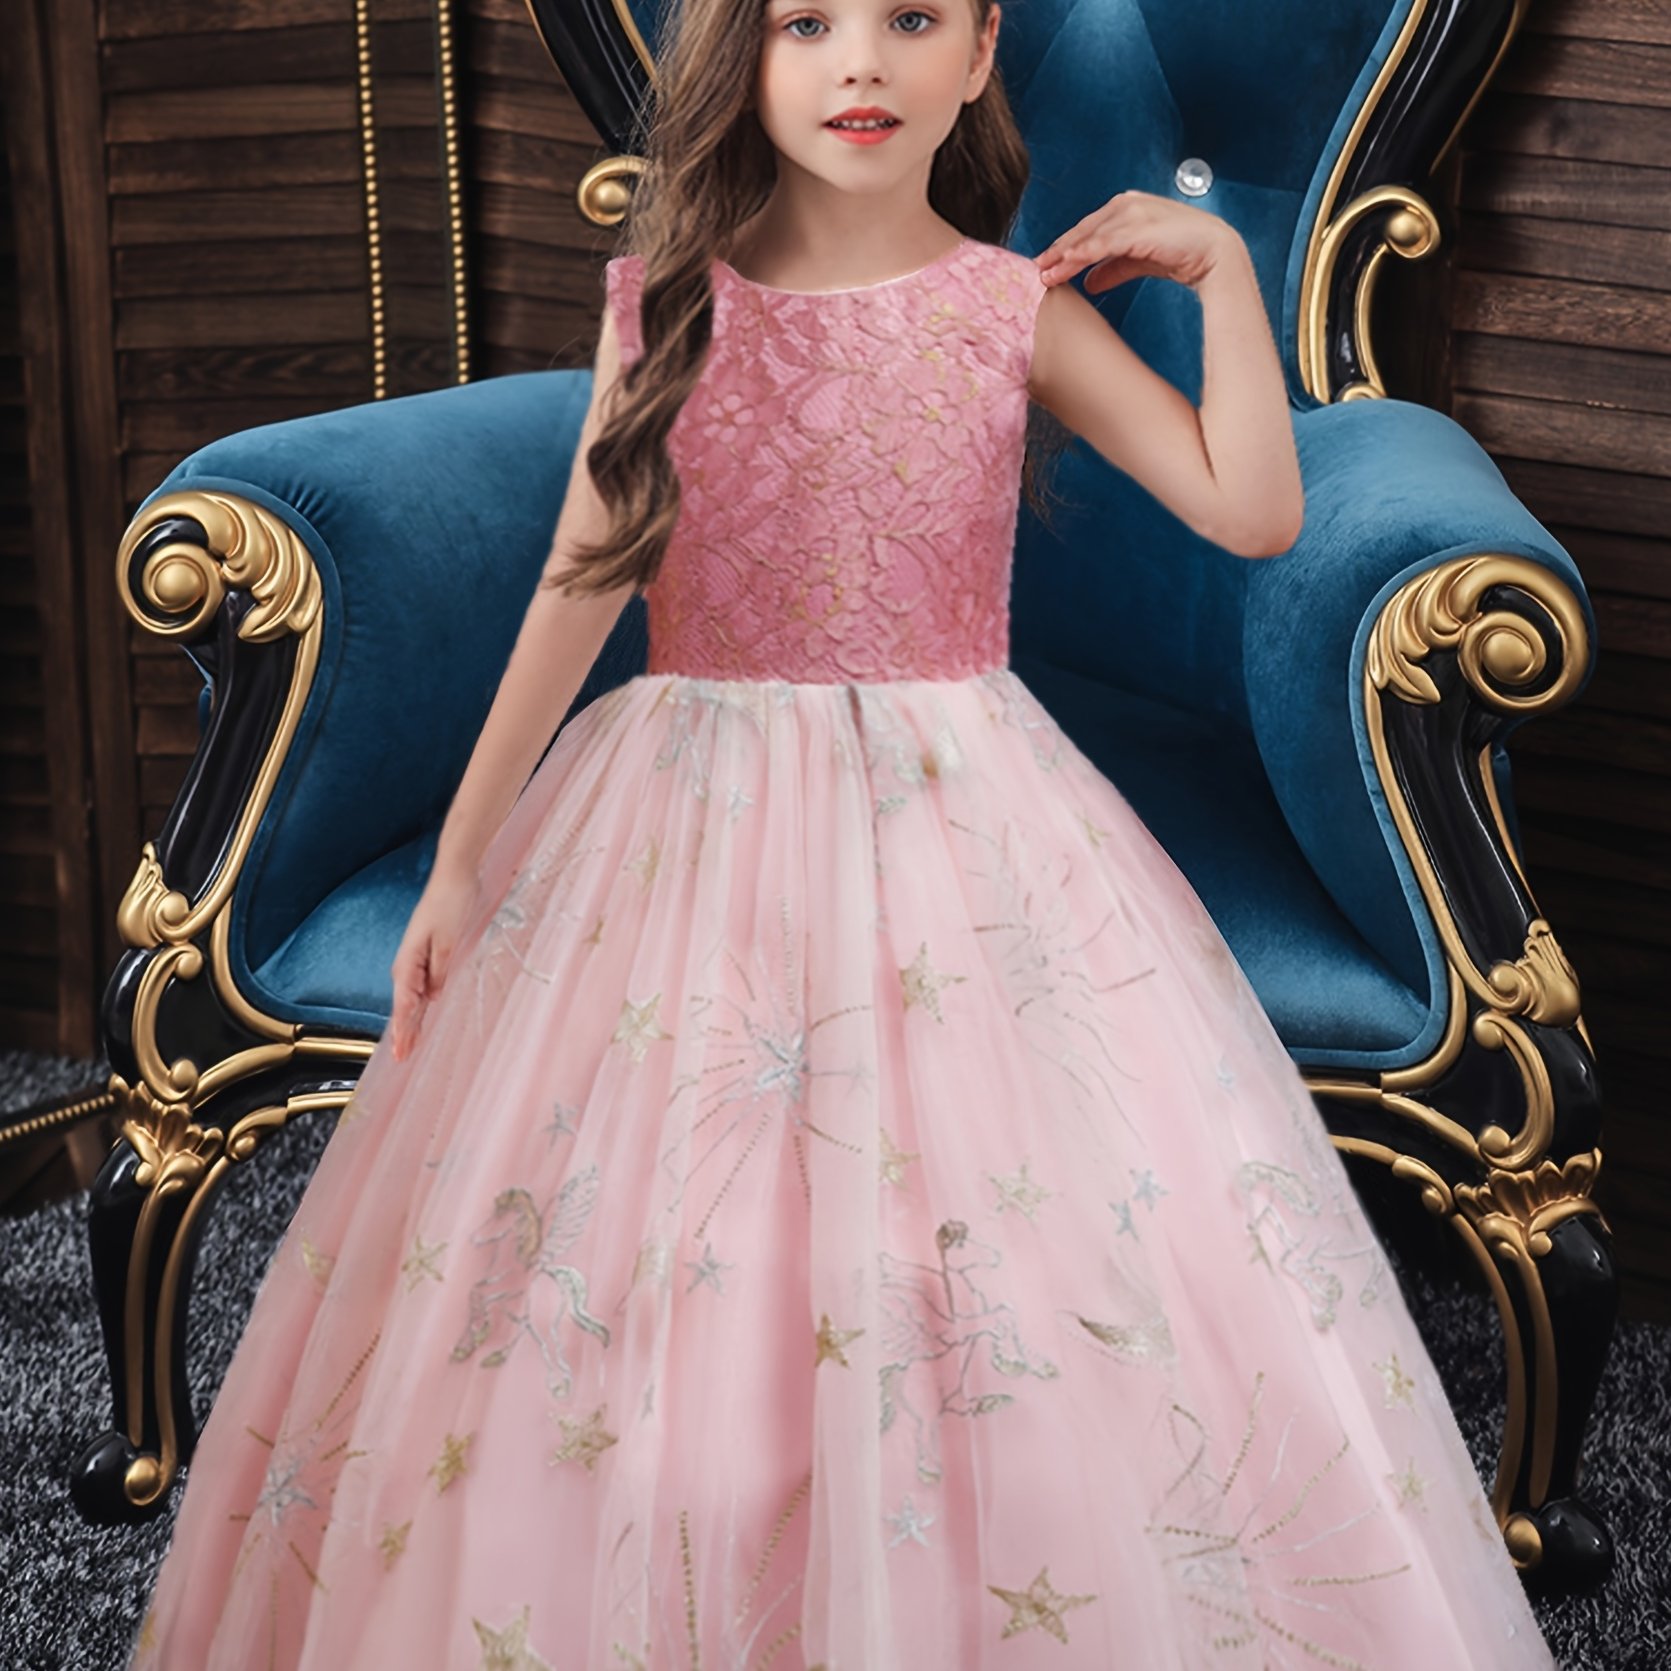 Taqqpue Kids Dress Girls Sleeveless Princess Dress Bow Tie Lace Flowers  Mesh Dress Tufted Dress Pageant Birthday Party Outfits Wedding Formal Dance  Evening Maxi Gown Princess Dress 